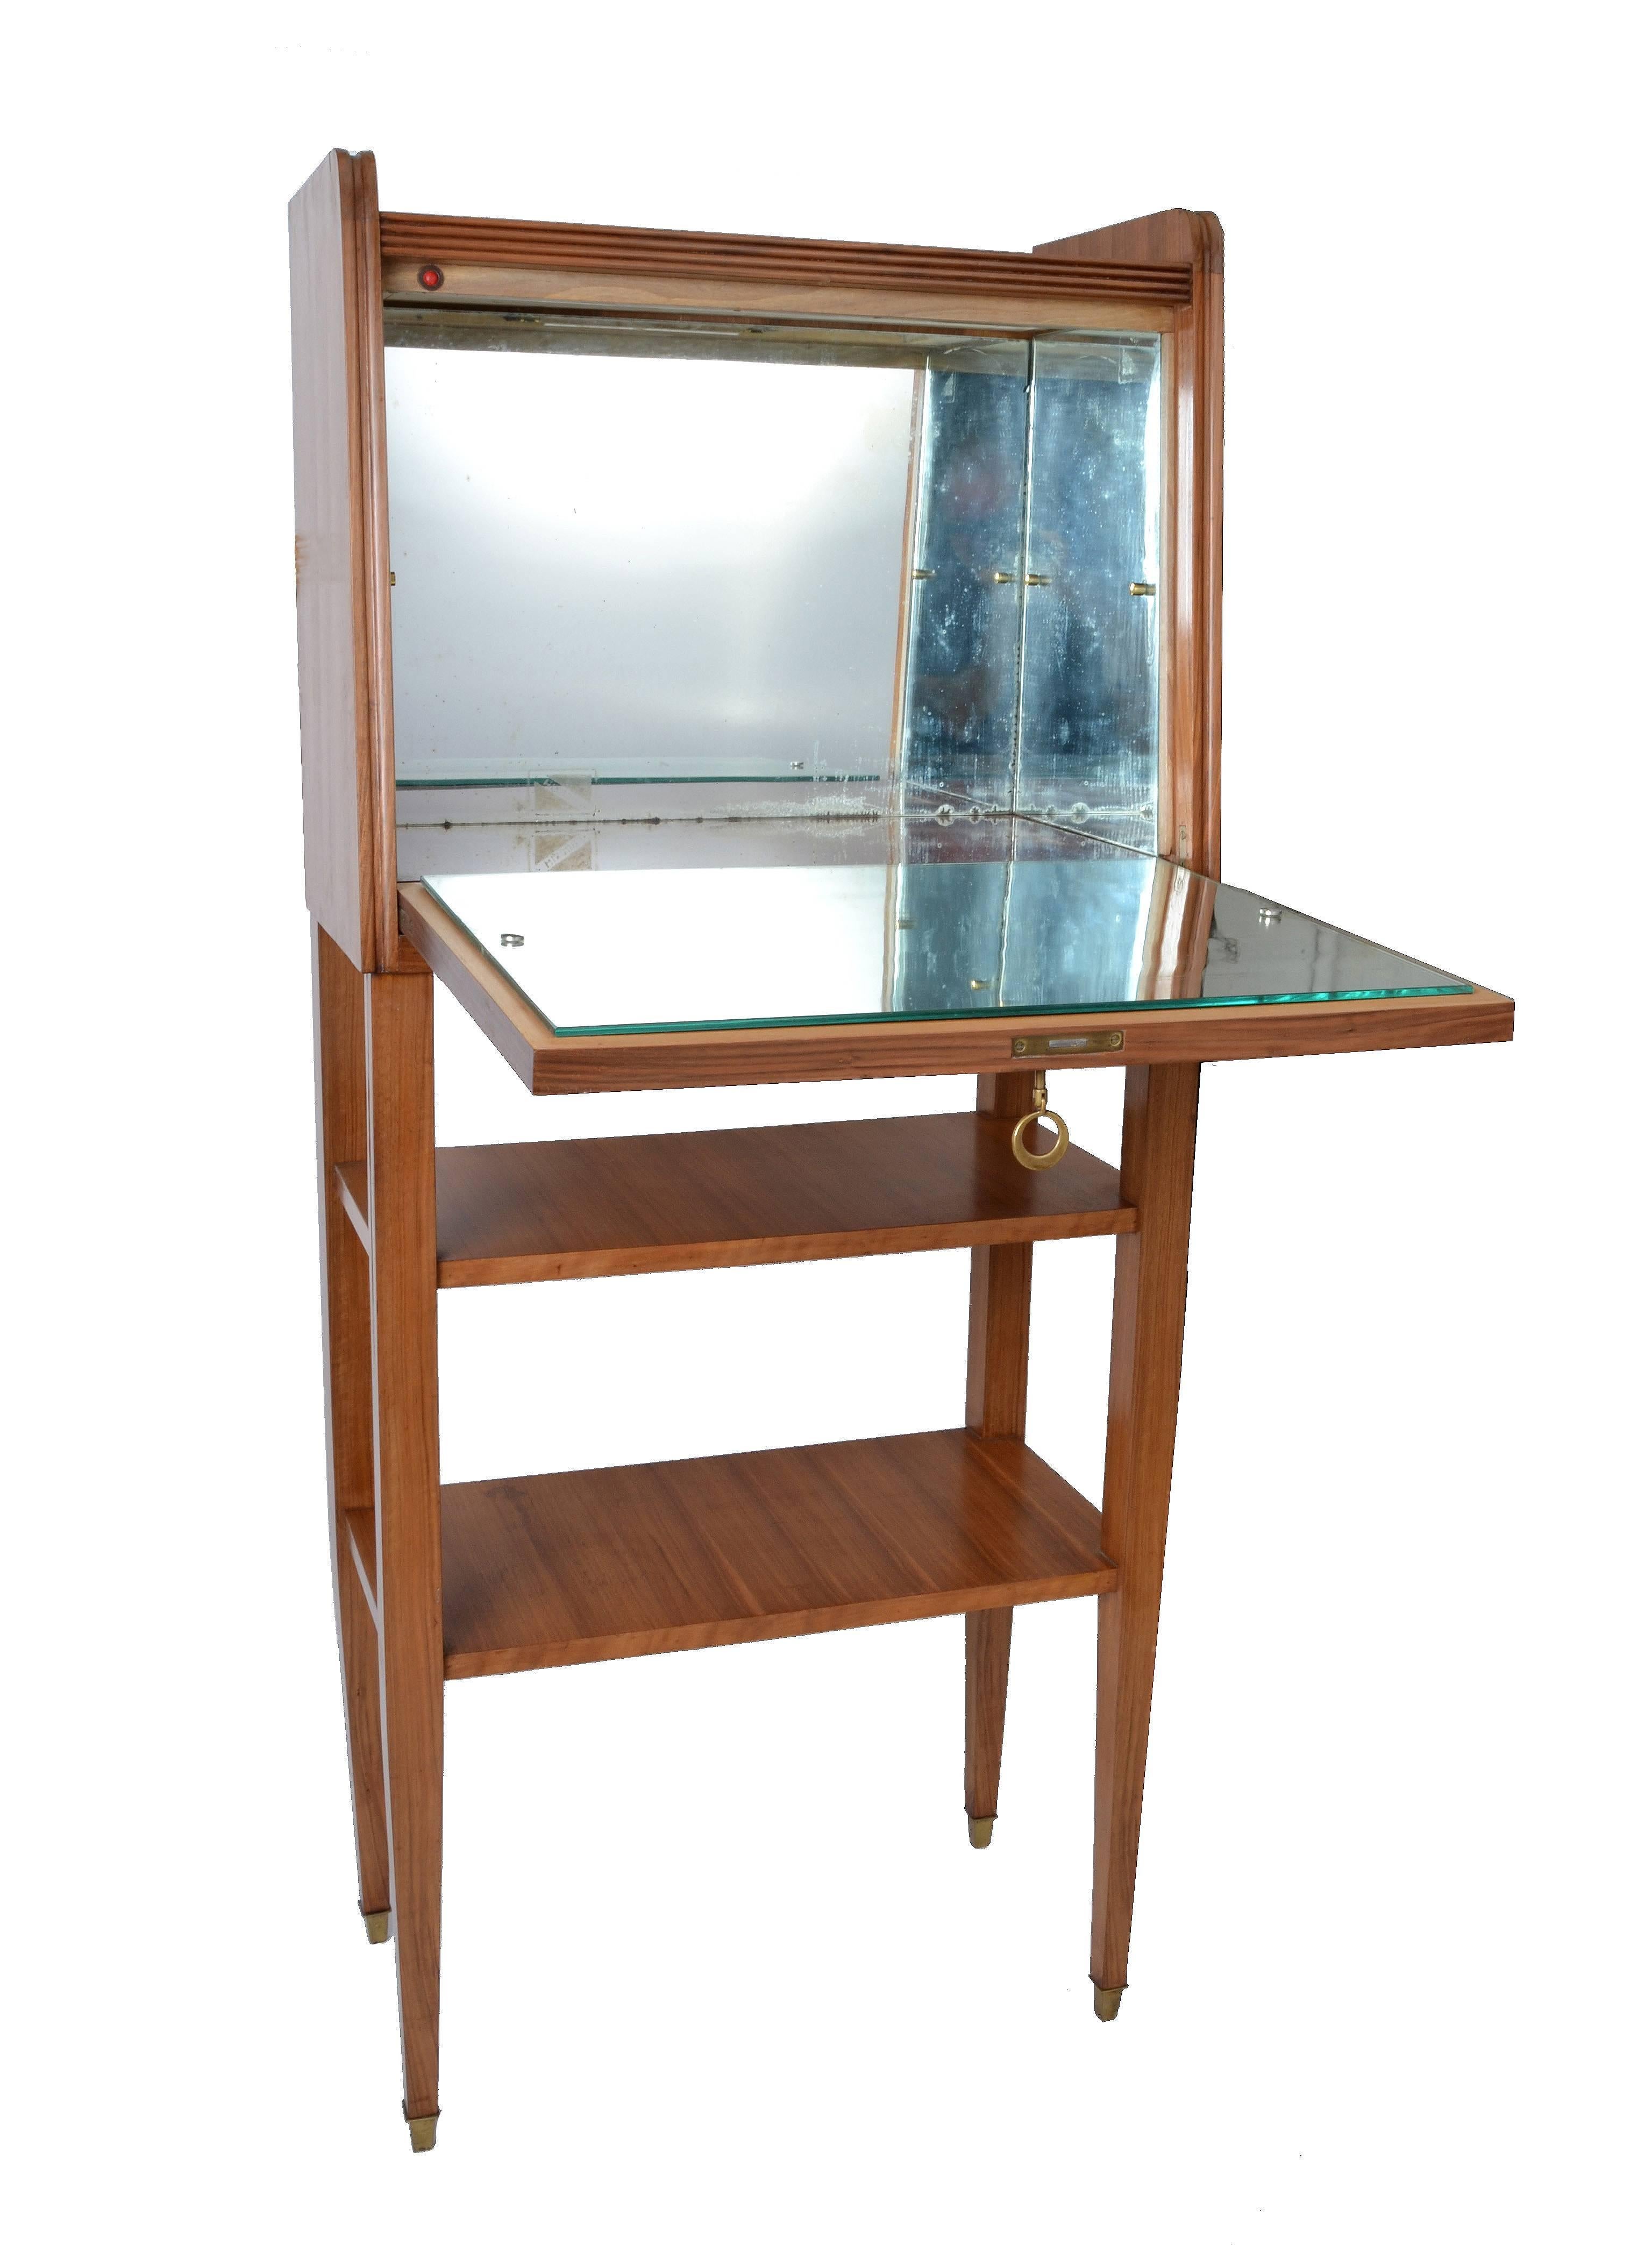 Art Deco Style tall wooden Dry Bar or High Bar made in Italy with carved instruments Marquetry on the drop-down door.
Two shelves for storage of Glassware Sets, Drinkware, Tumblers and Culver Glass.
The inside is featured with mirror glass and has a